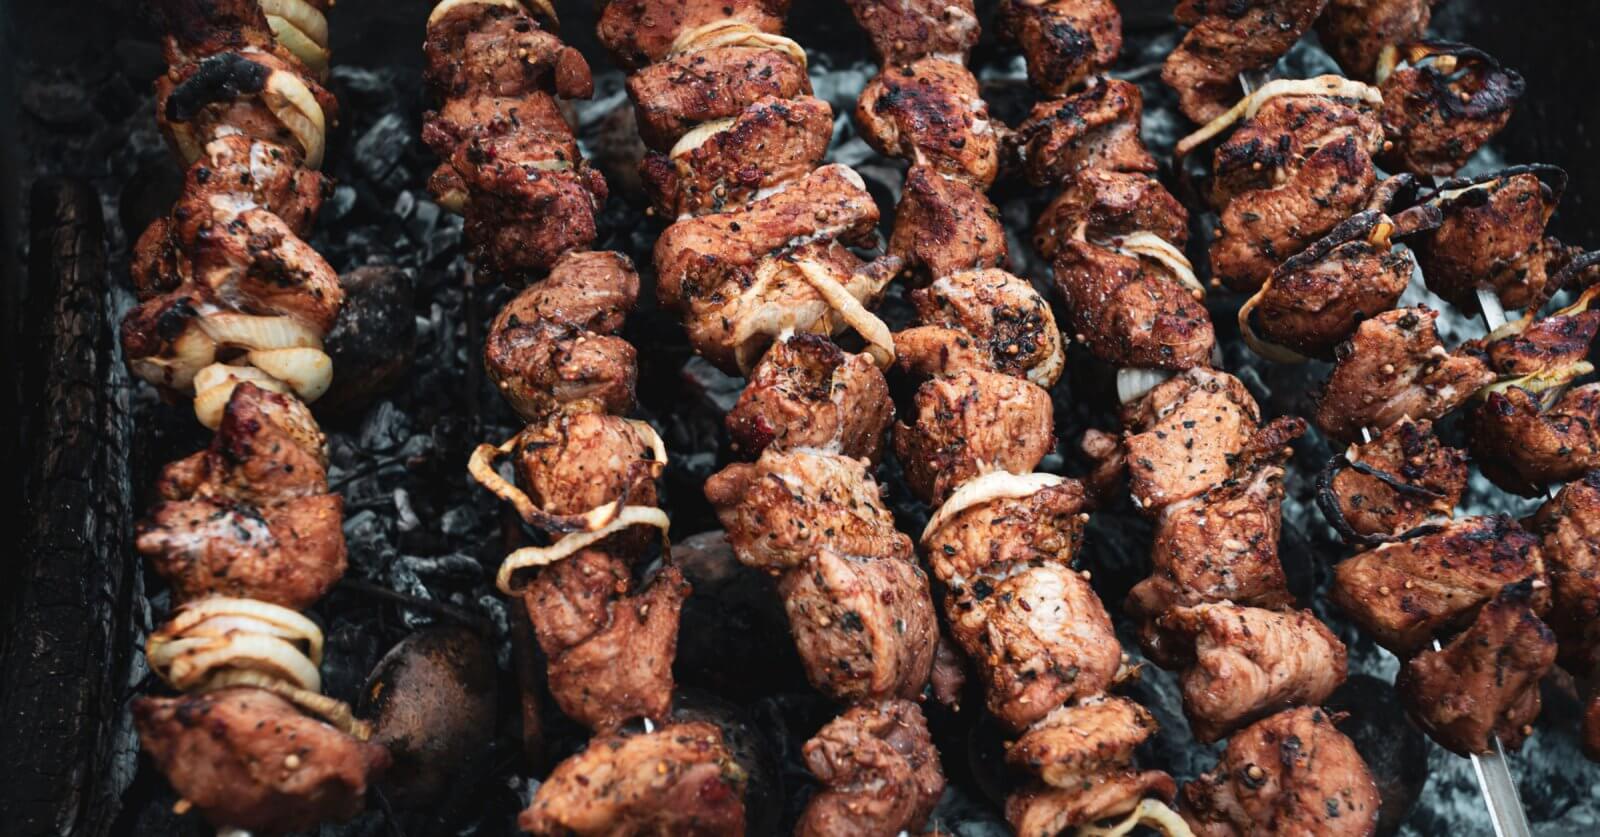 Several skewers of marinated meat and onions are being grilled over a bed of charcoal. The meat is slightly charred, giving it a deliciously cooked look with visible spices and seasoning. The skewers are spaced closely together, filling up the grill surface—just like you'd find at the best restaurants in Tomas Morato.